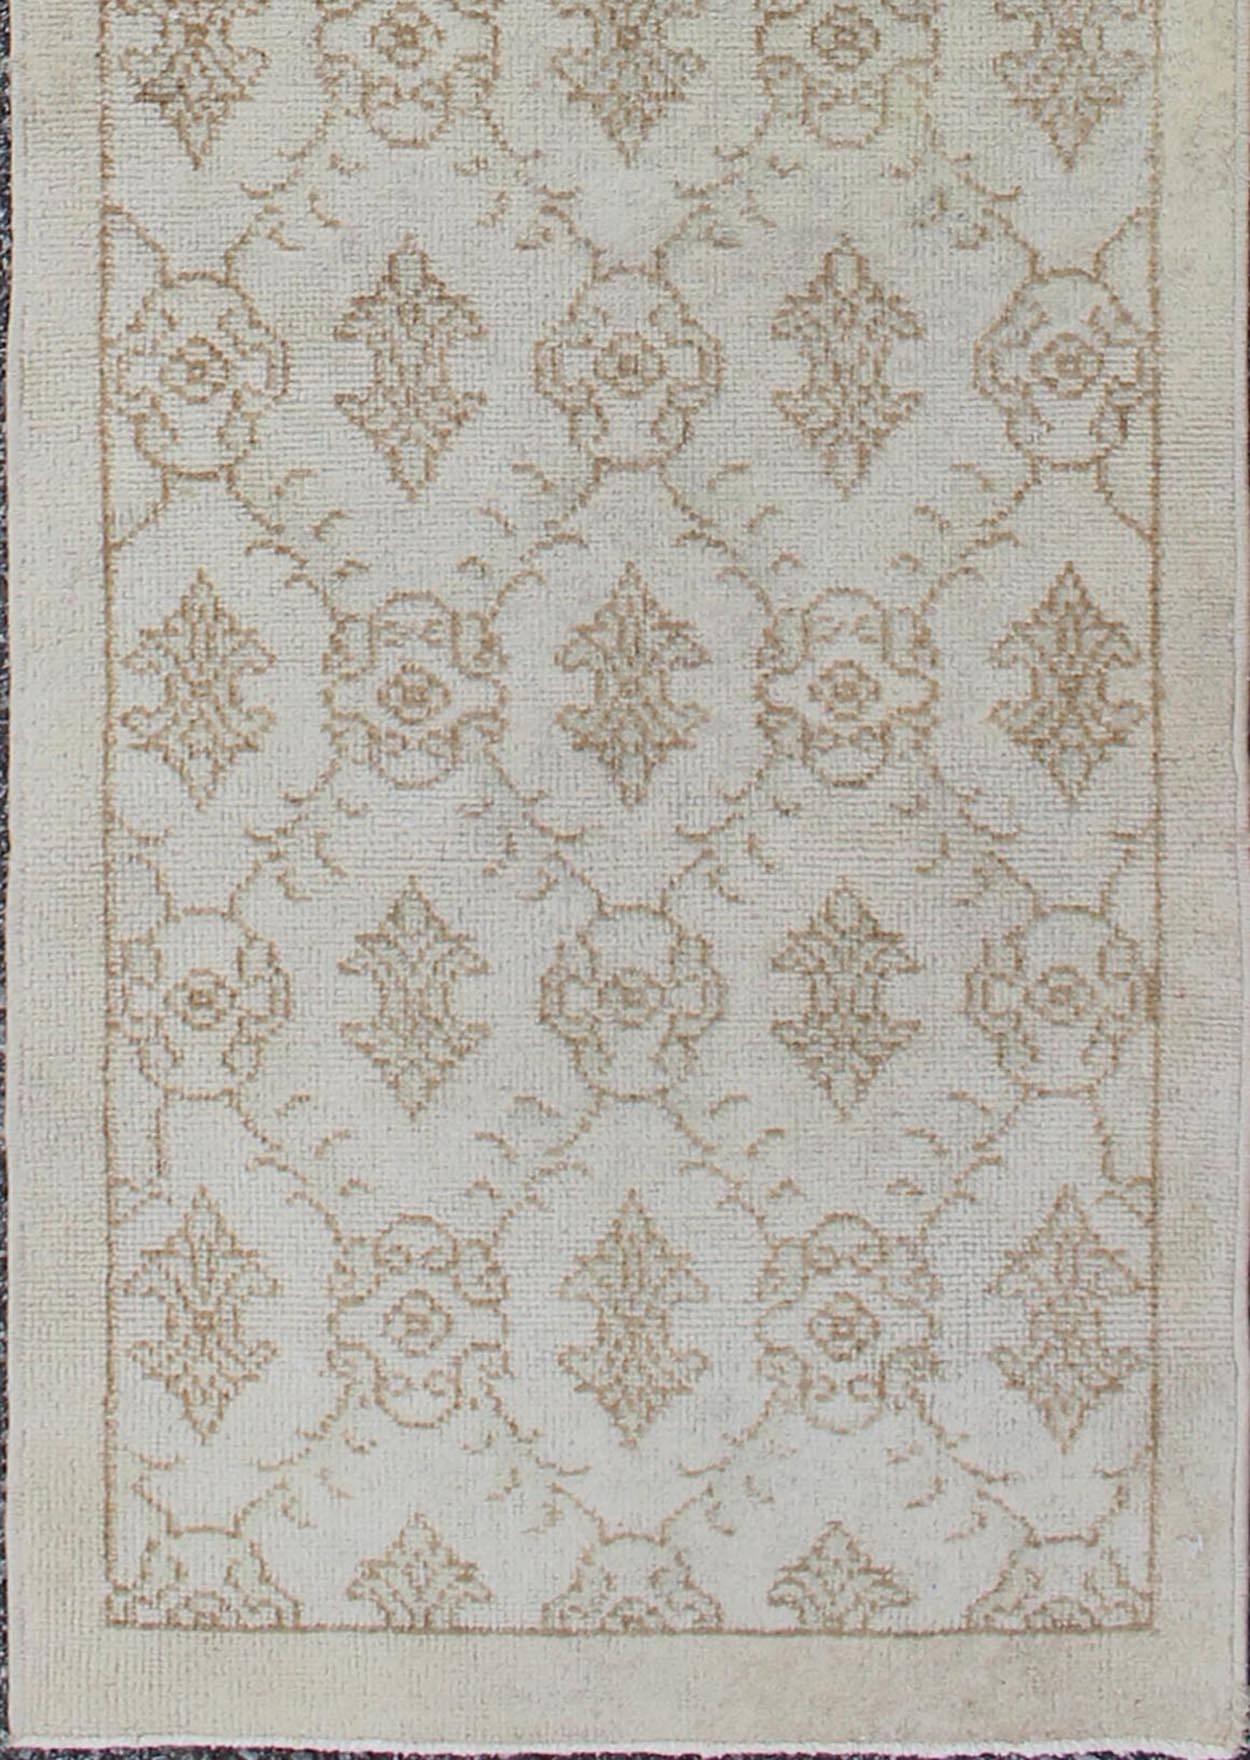 This vintage Turkish Oushak runner (circa mid-20th century) features an all-over latticework design with arrowhead figures throughout. The rug's qualities are enhanced by its particularly soft and lustrous wool. Colors include ivory and light